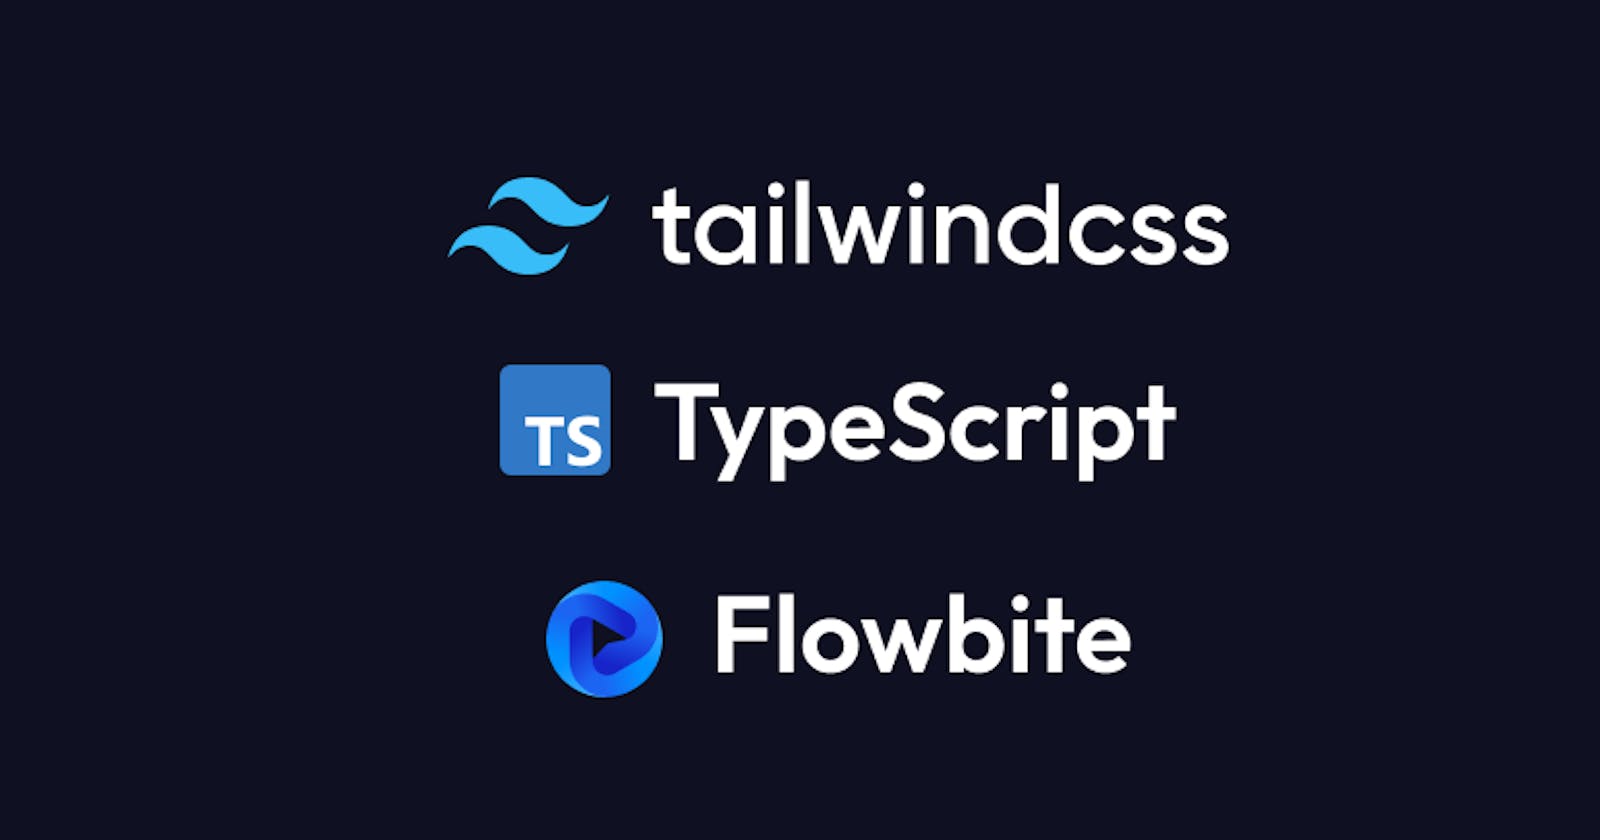 Learn how to set up Tailwind CSS with TypeScript and Flowbite